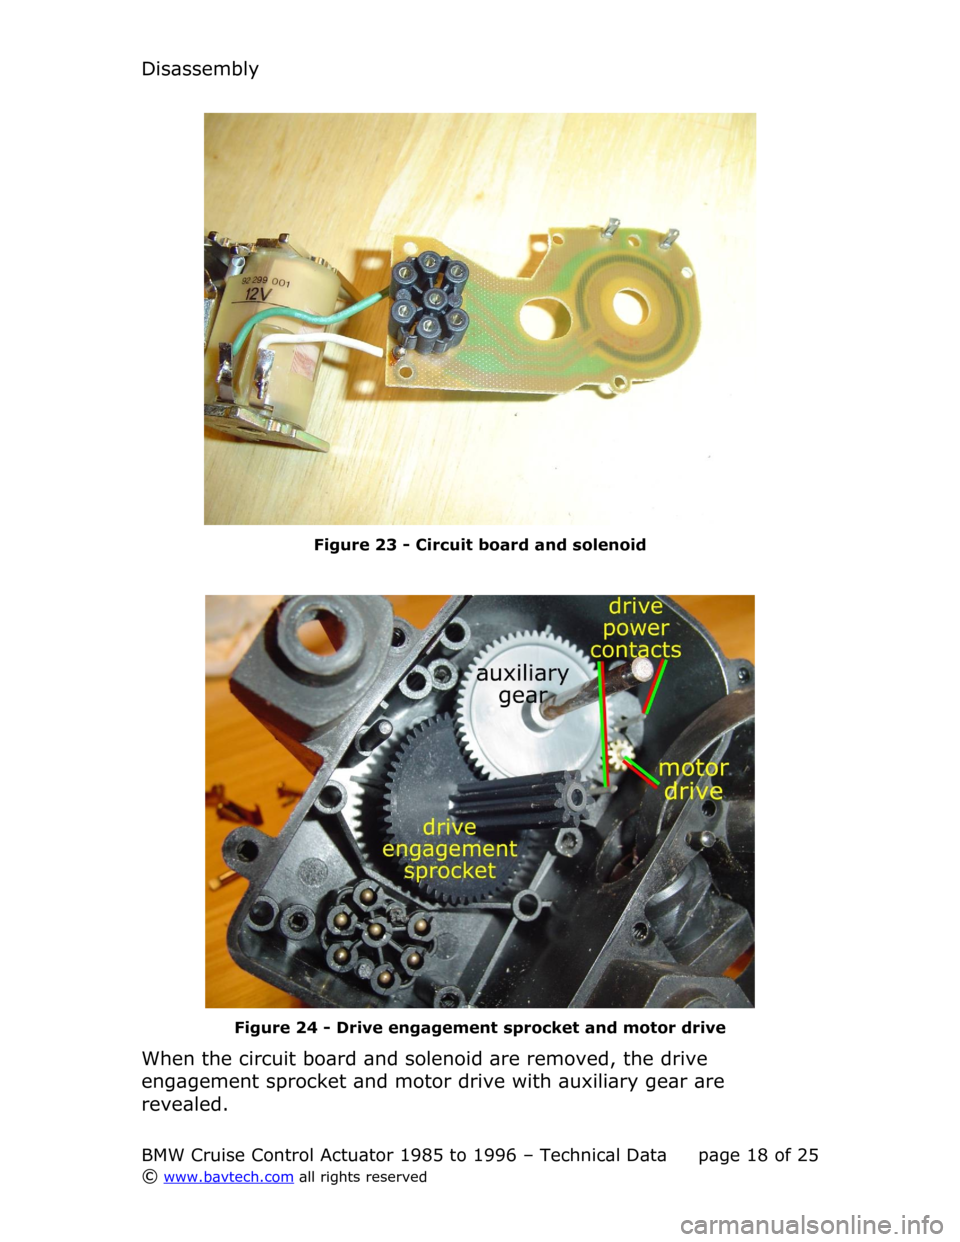 BMW 3 SERIES 1994 E36 Cruise Control Acutator Disassembly
Figure  23  - Circuit board and solenoid
Figure  24  - Drive engagement sprocket and motor drive
When the circuit board and solenoid are removed, the drive  
engagement sprocket and motor 